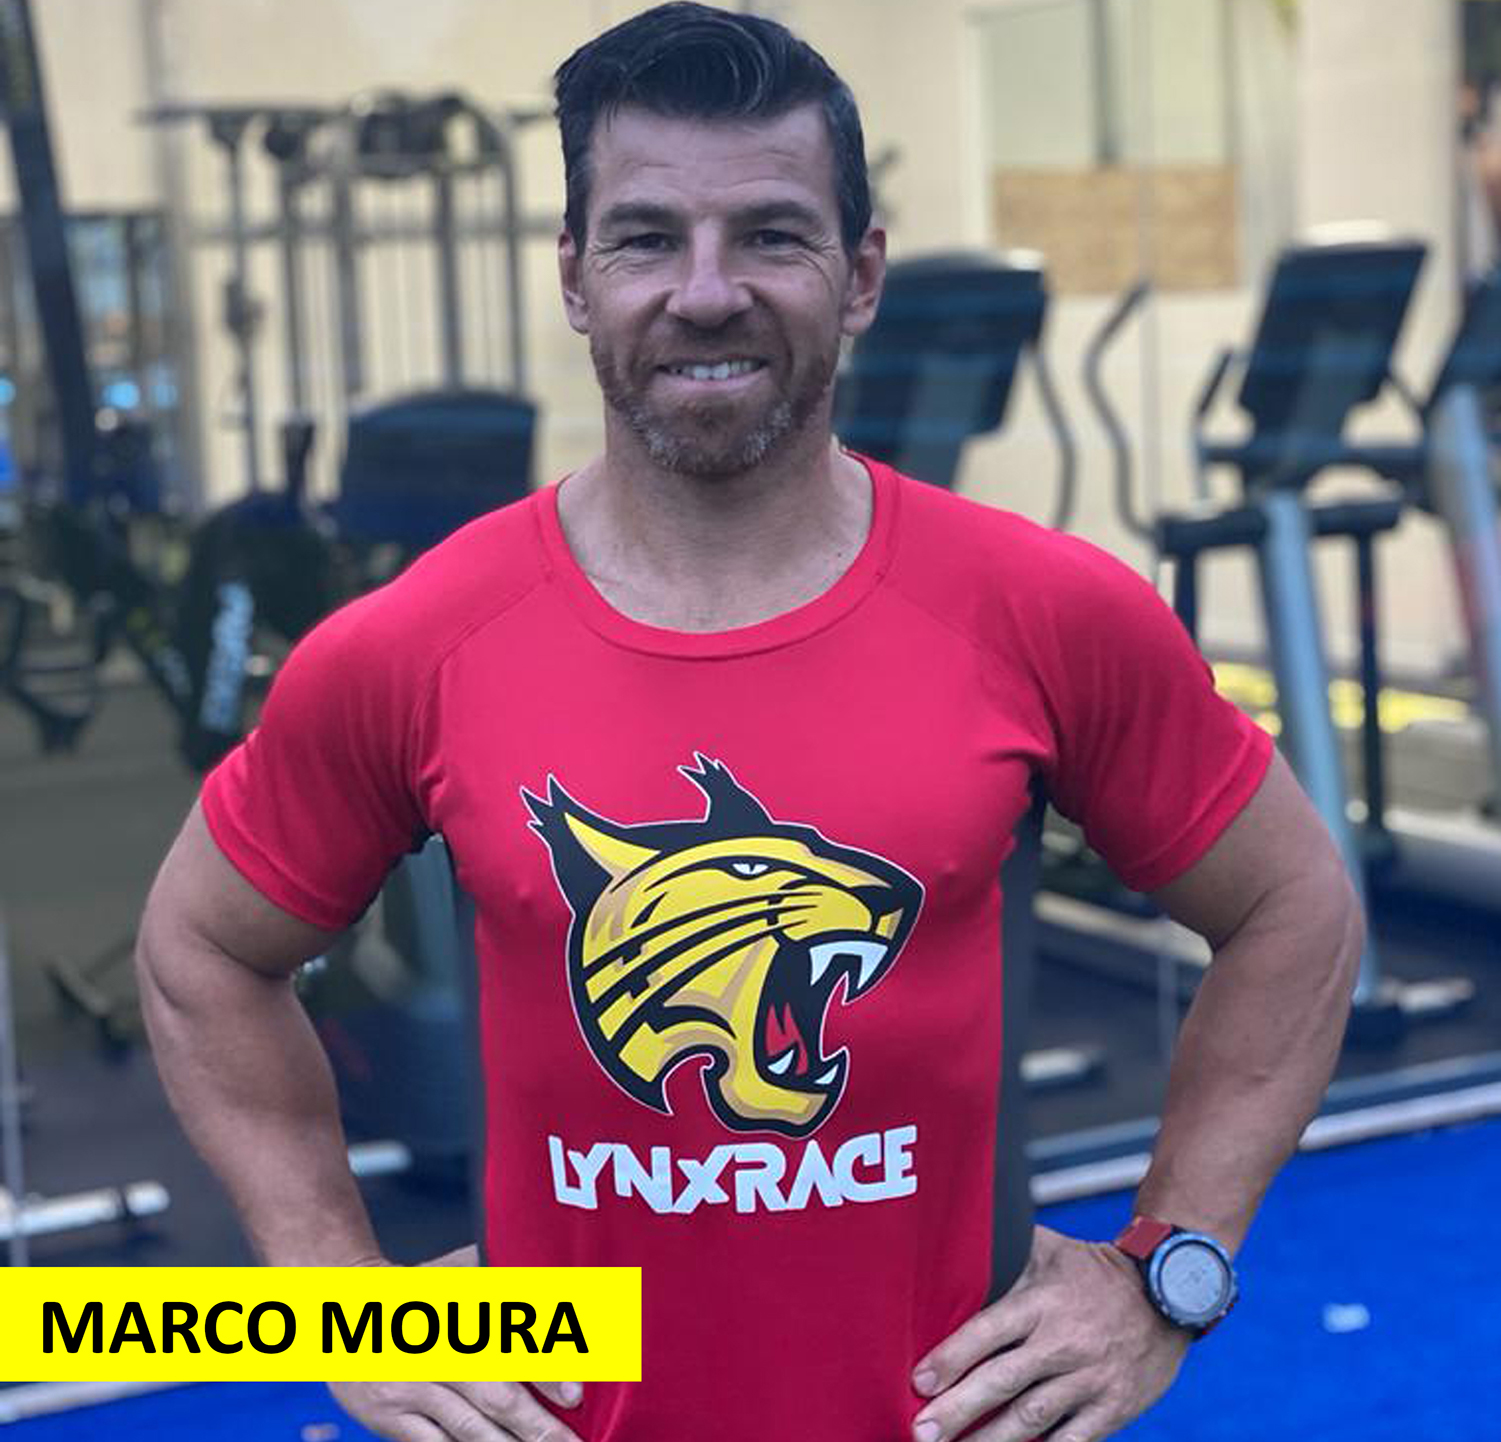 MARCO MOURA